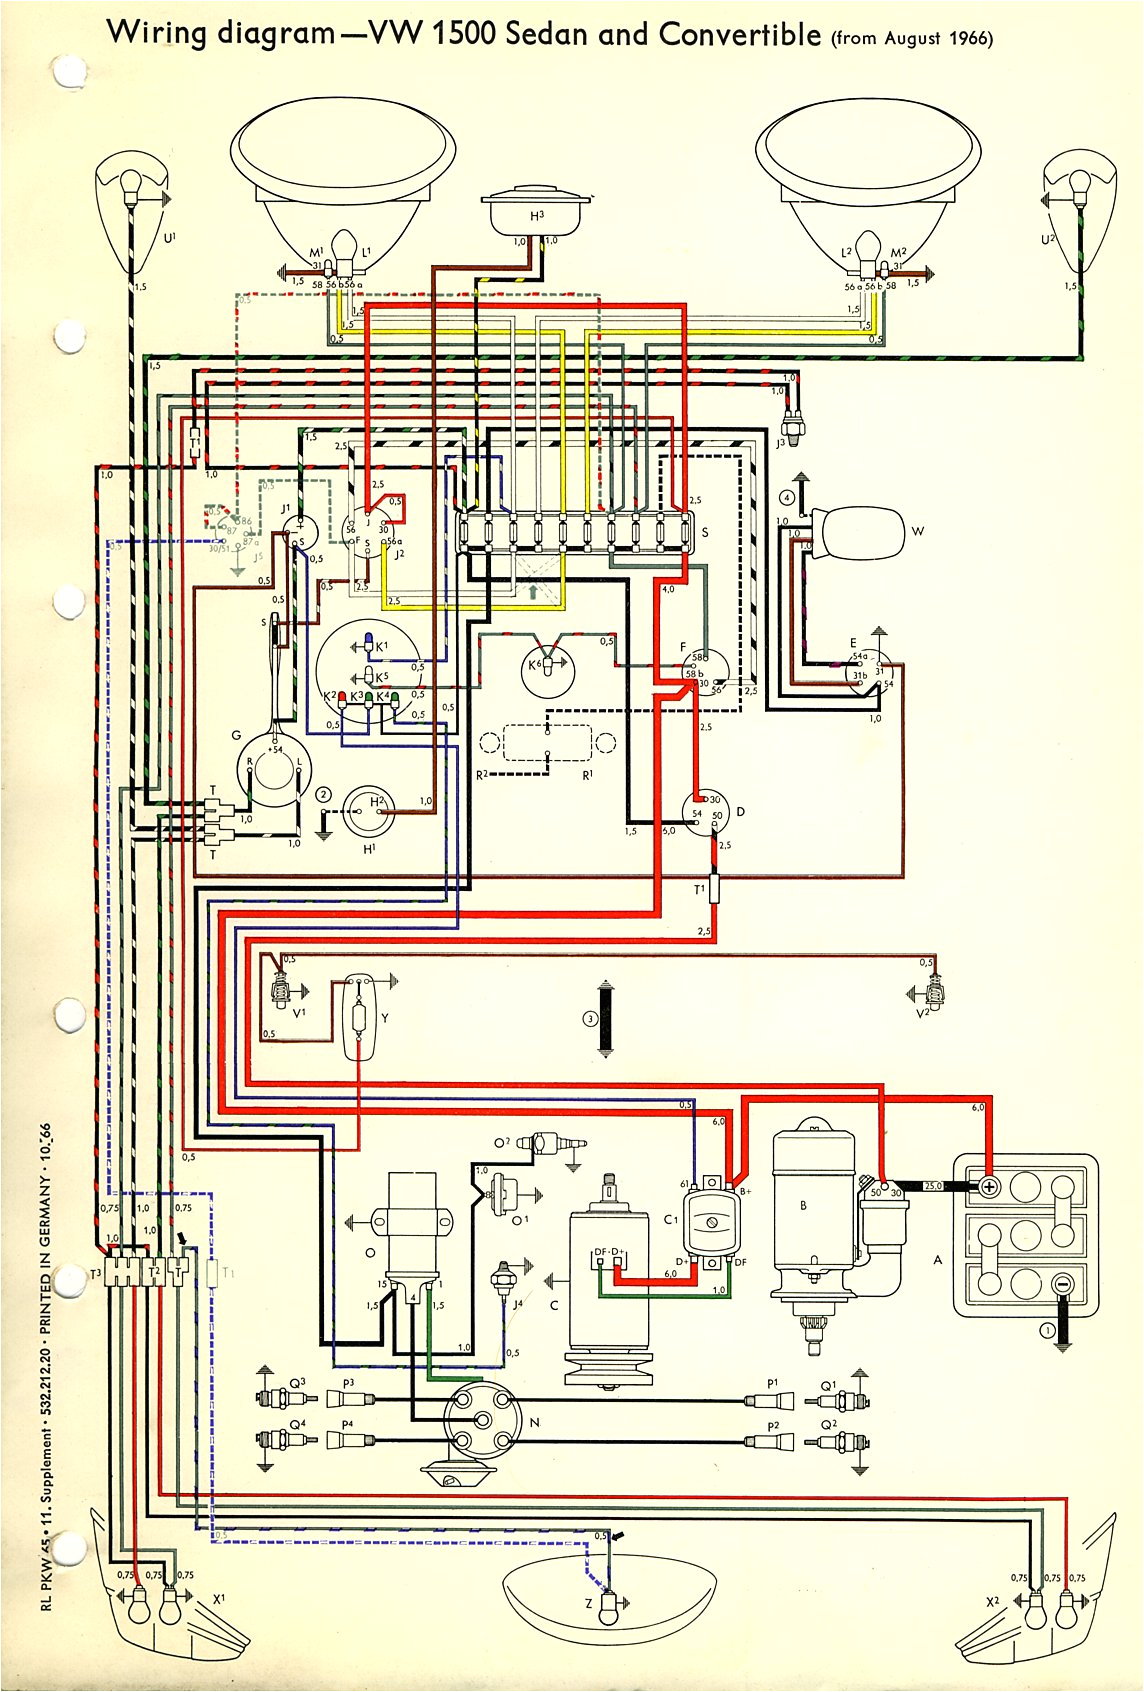 1973 vw wiring diagram wiring diagram operations 1973 vw bus ignition switch wiring diagram